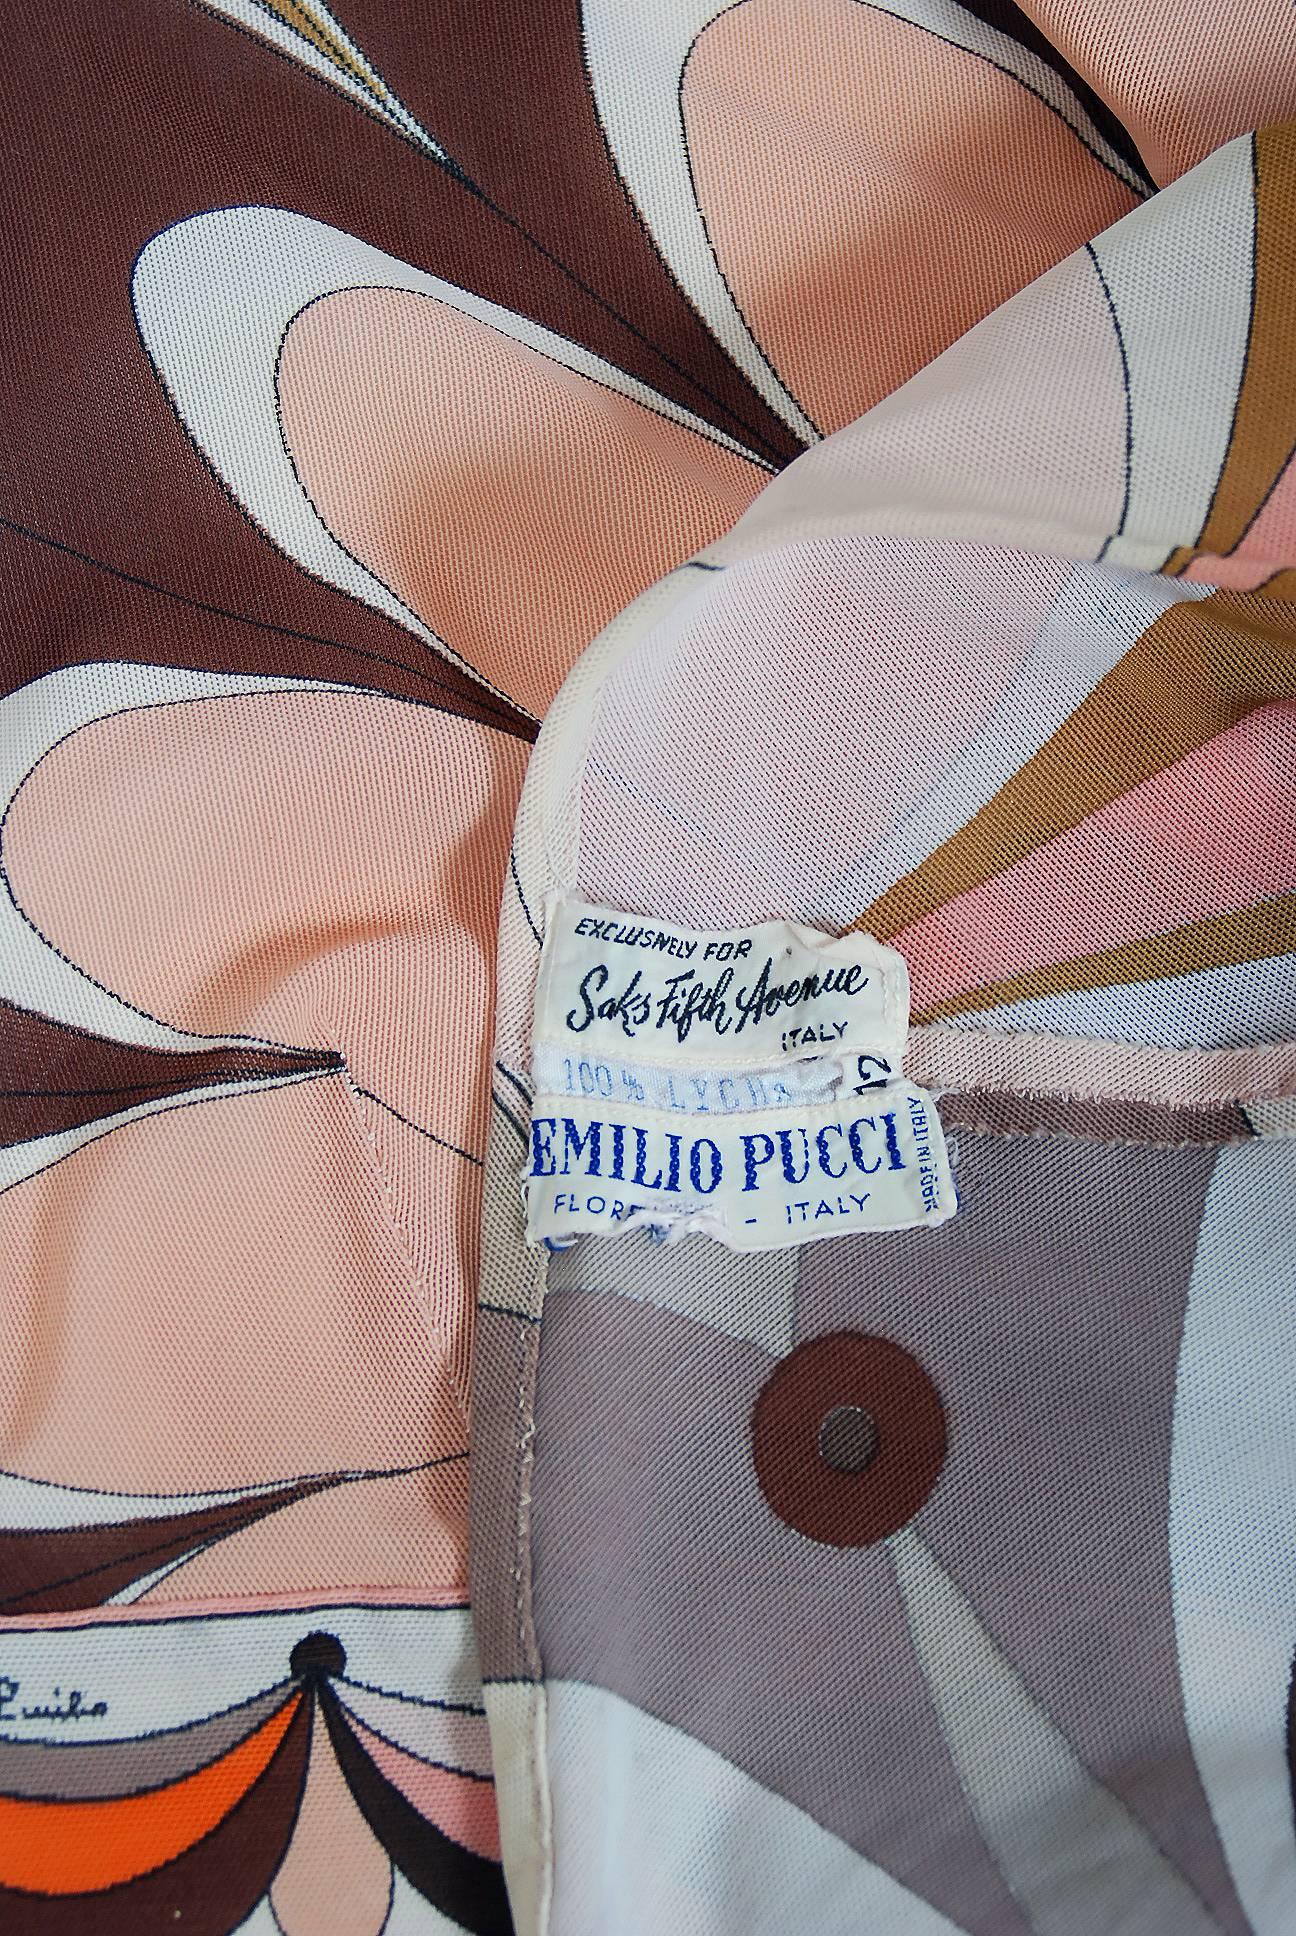 1969 Emilio Pucci Documented Pink & Brown Graphic Print Cut-Out Bikini Swimsuit 3